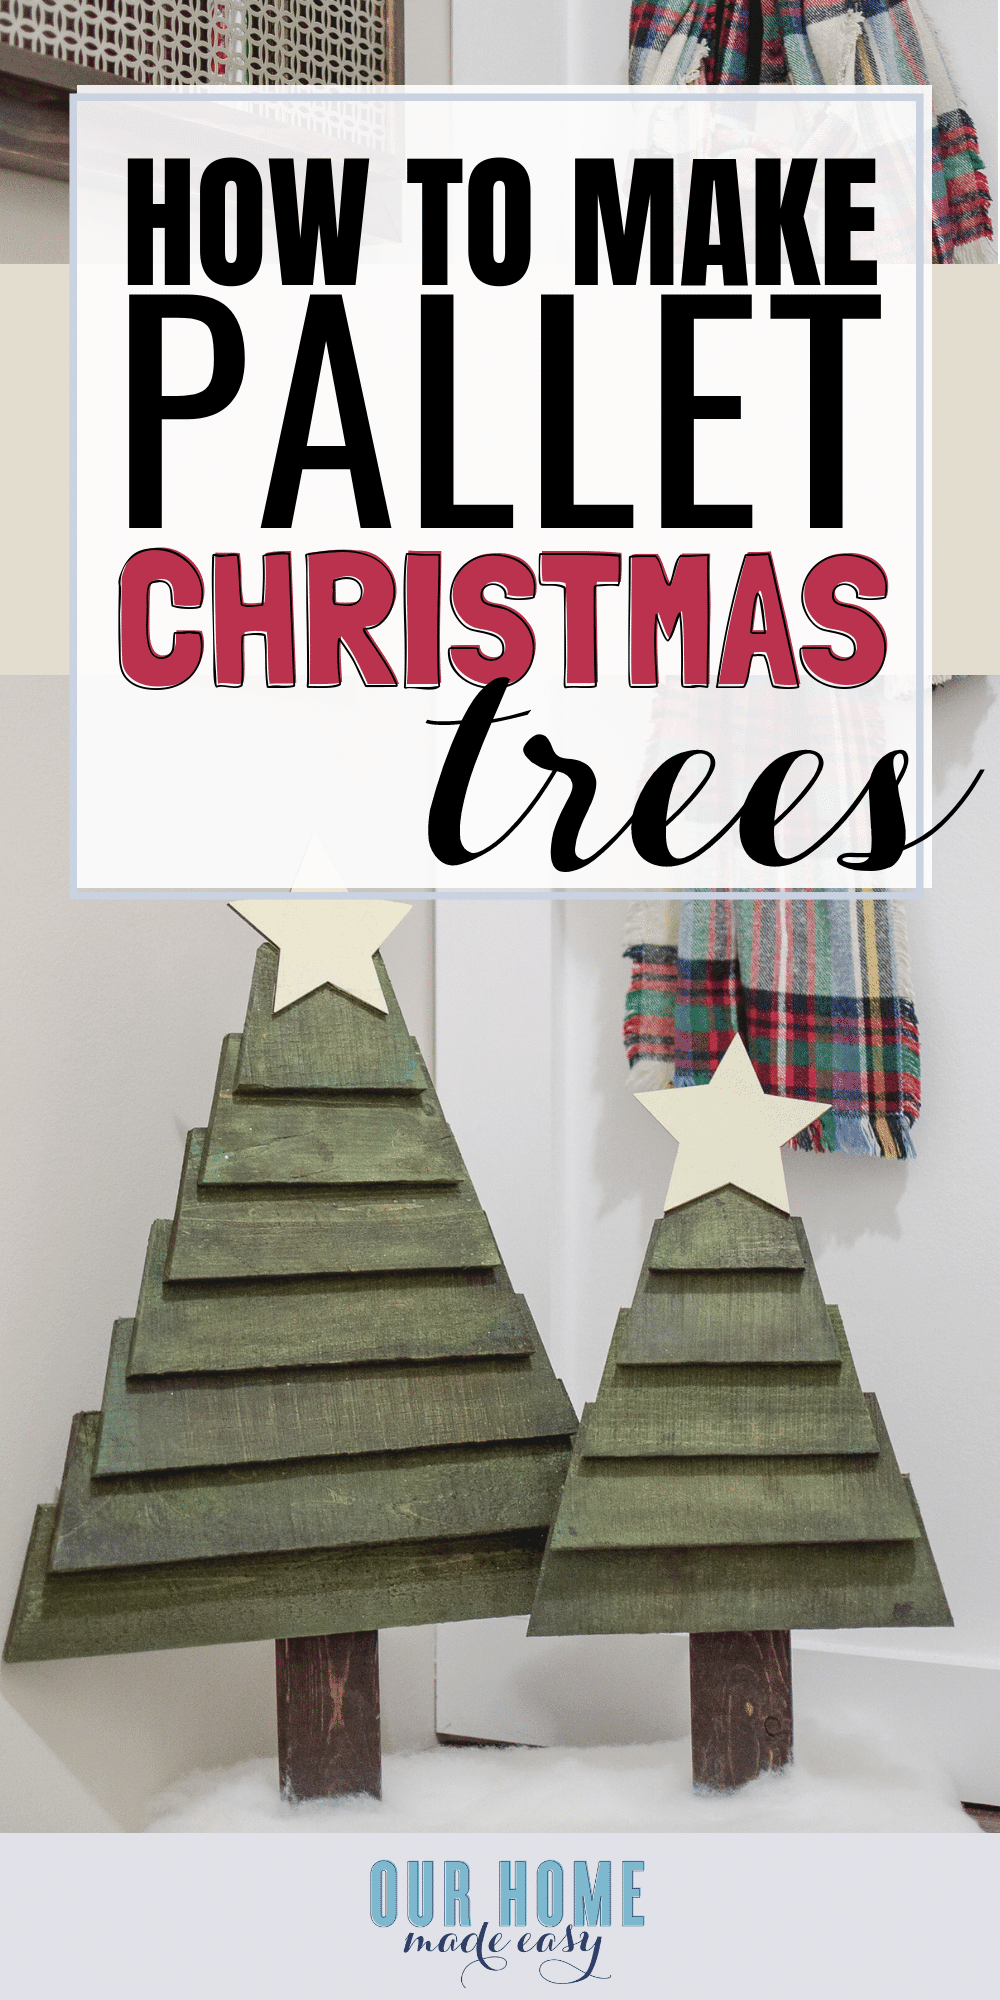 How to make pallet Christmas trees for your Christmas home decor.